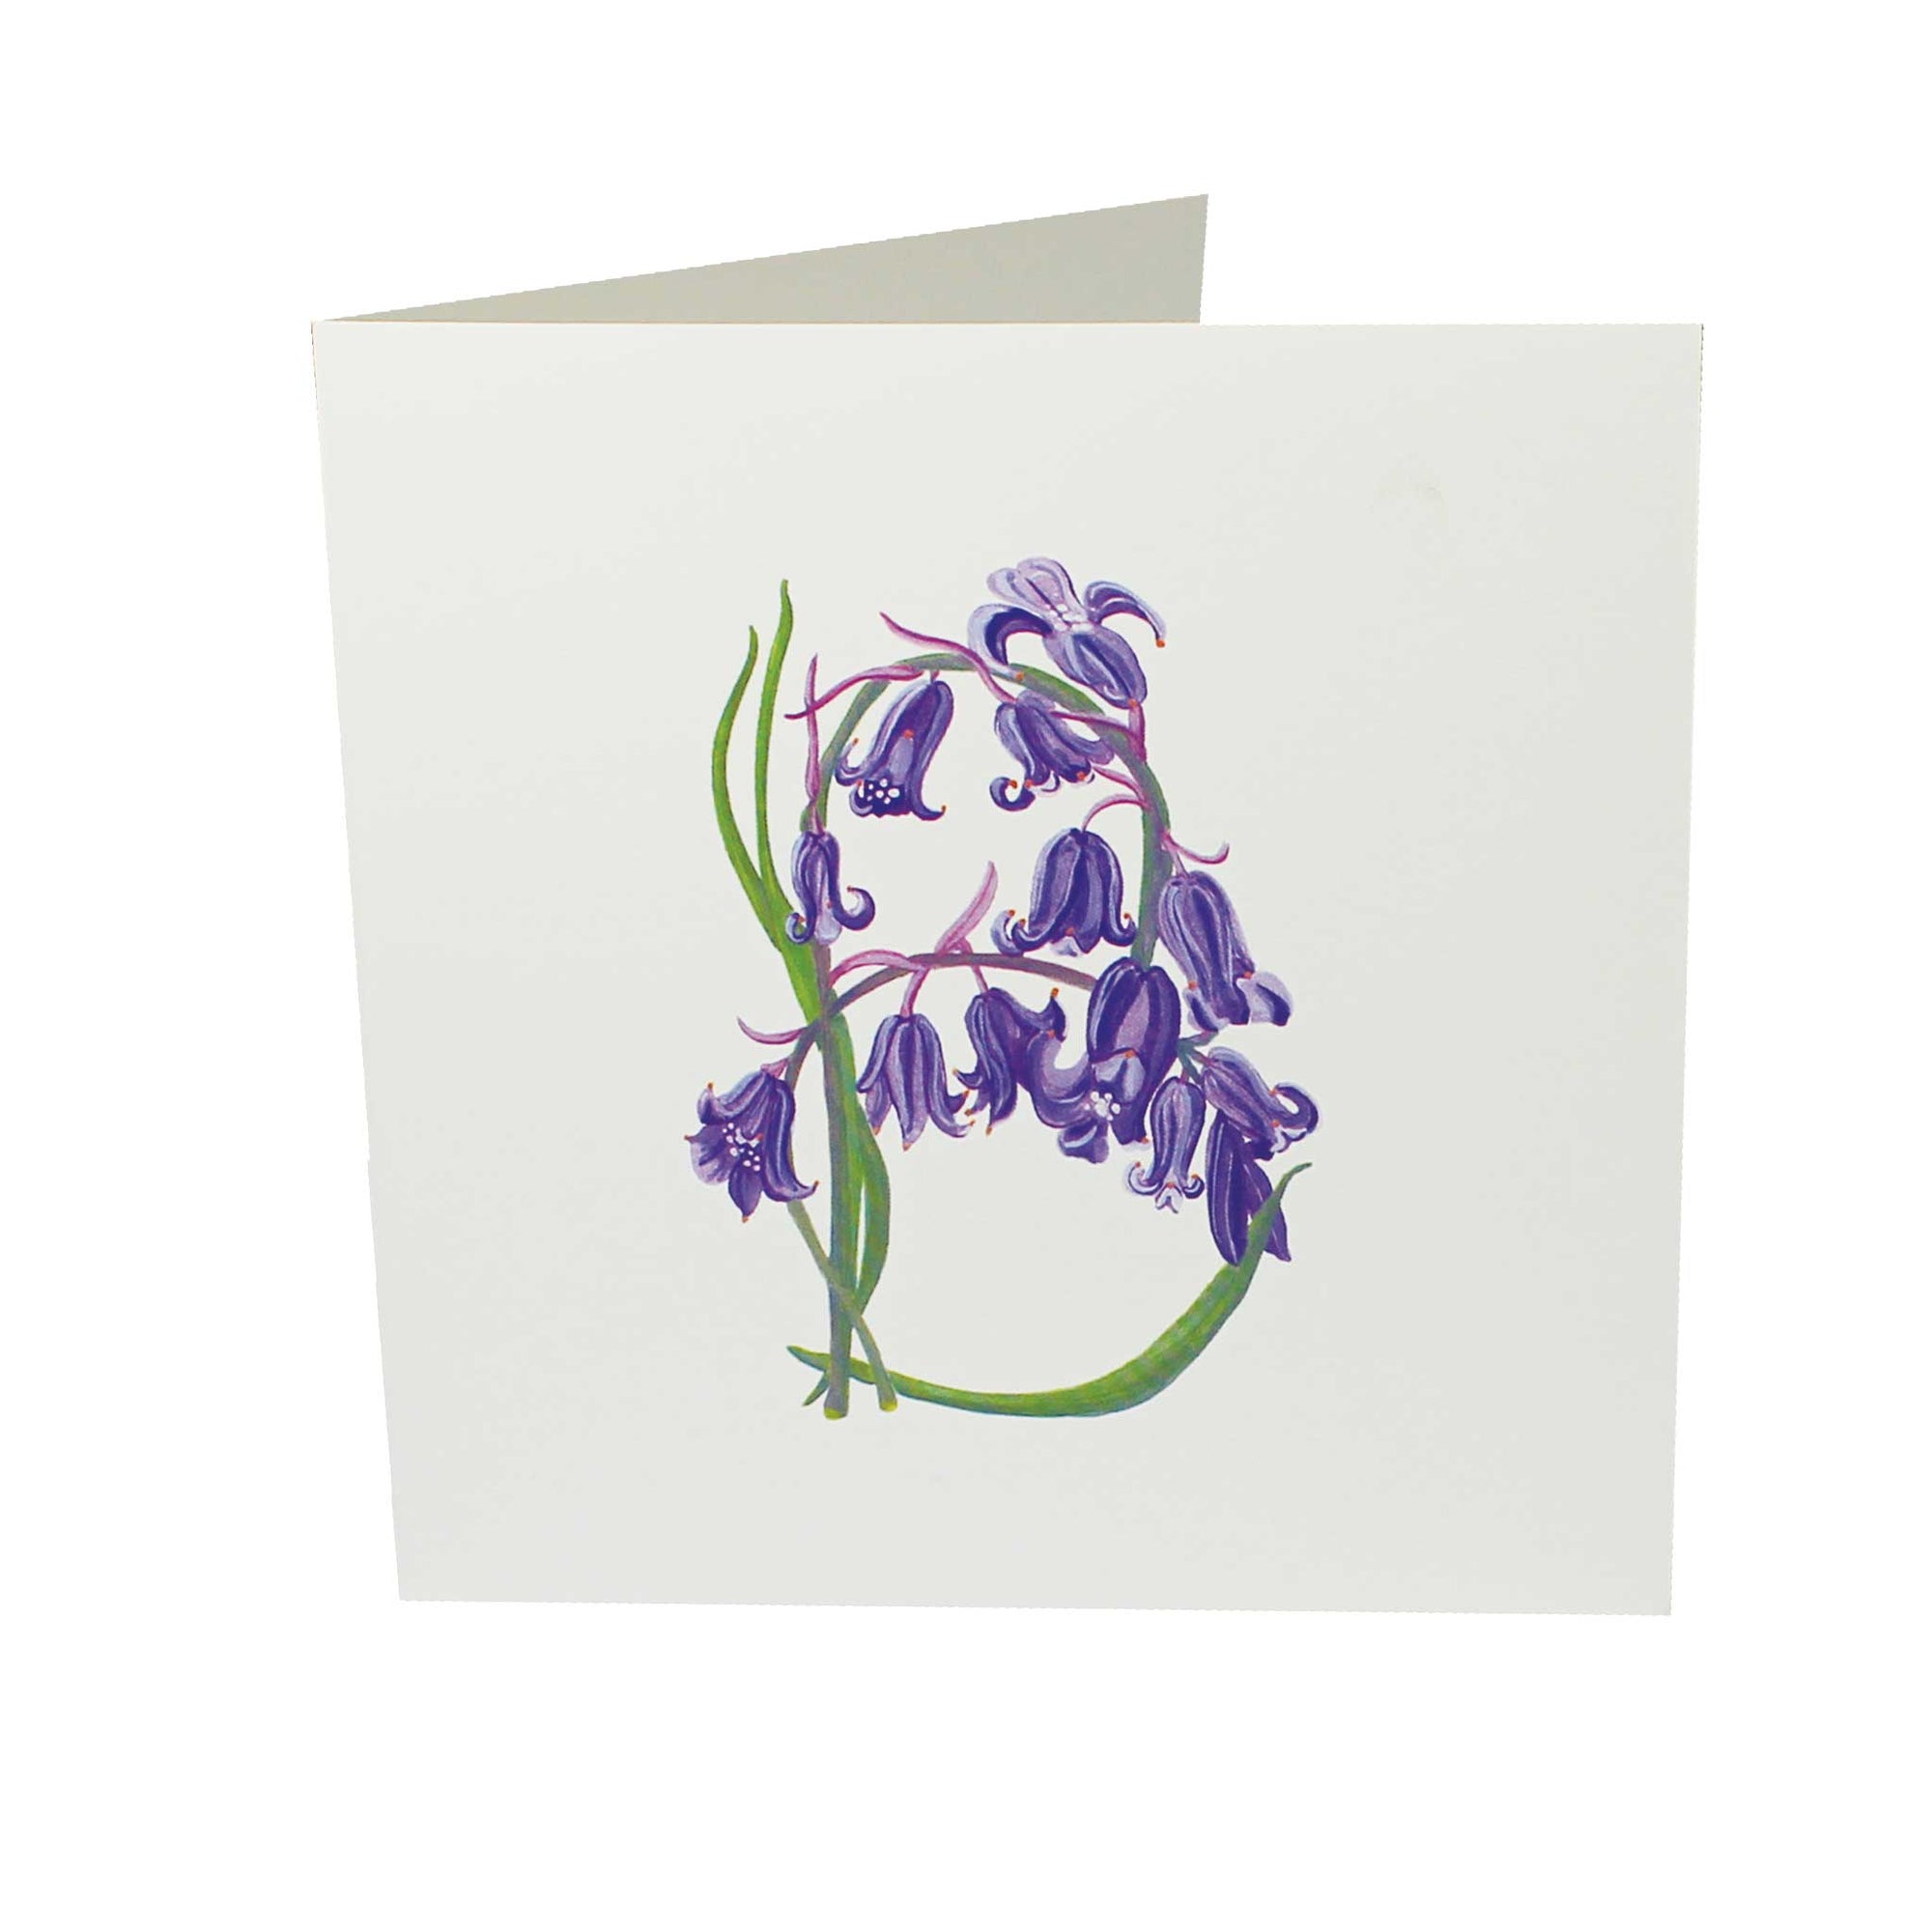 B is for Bluebell